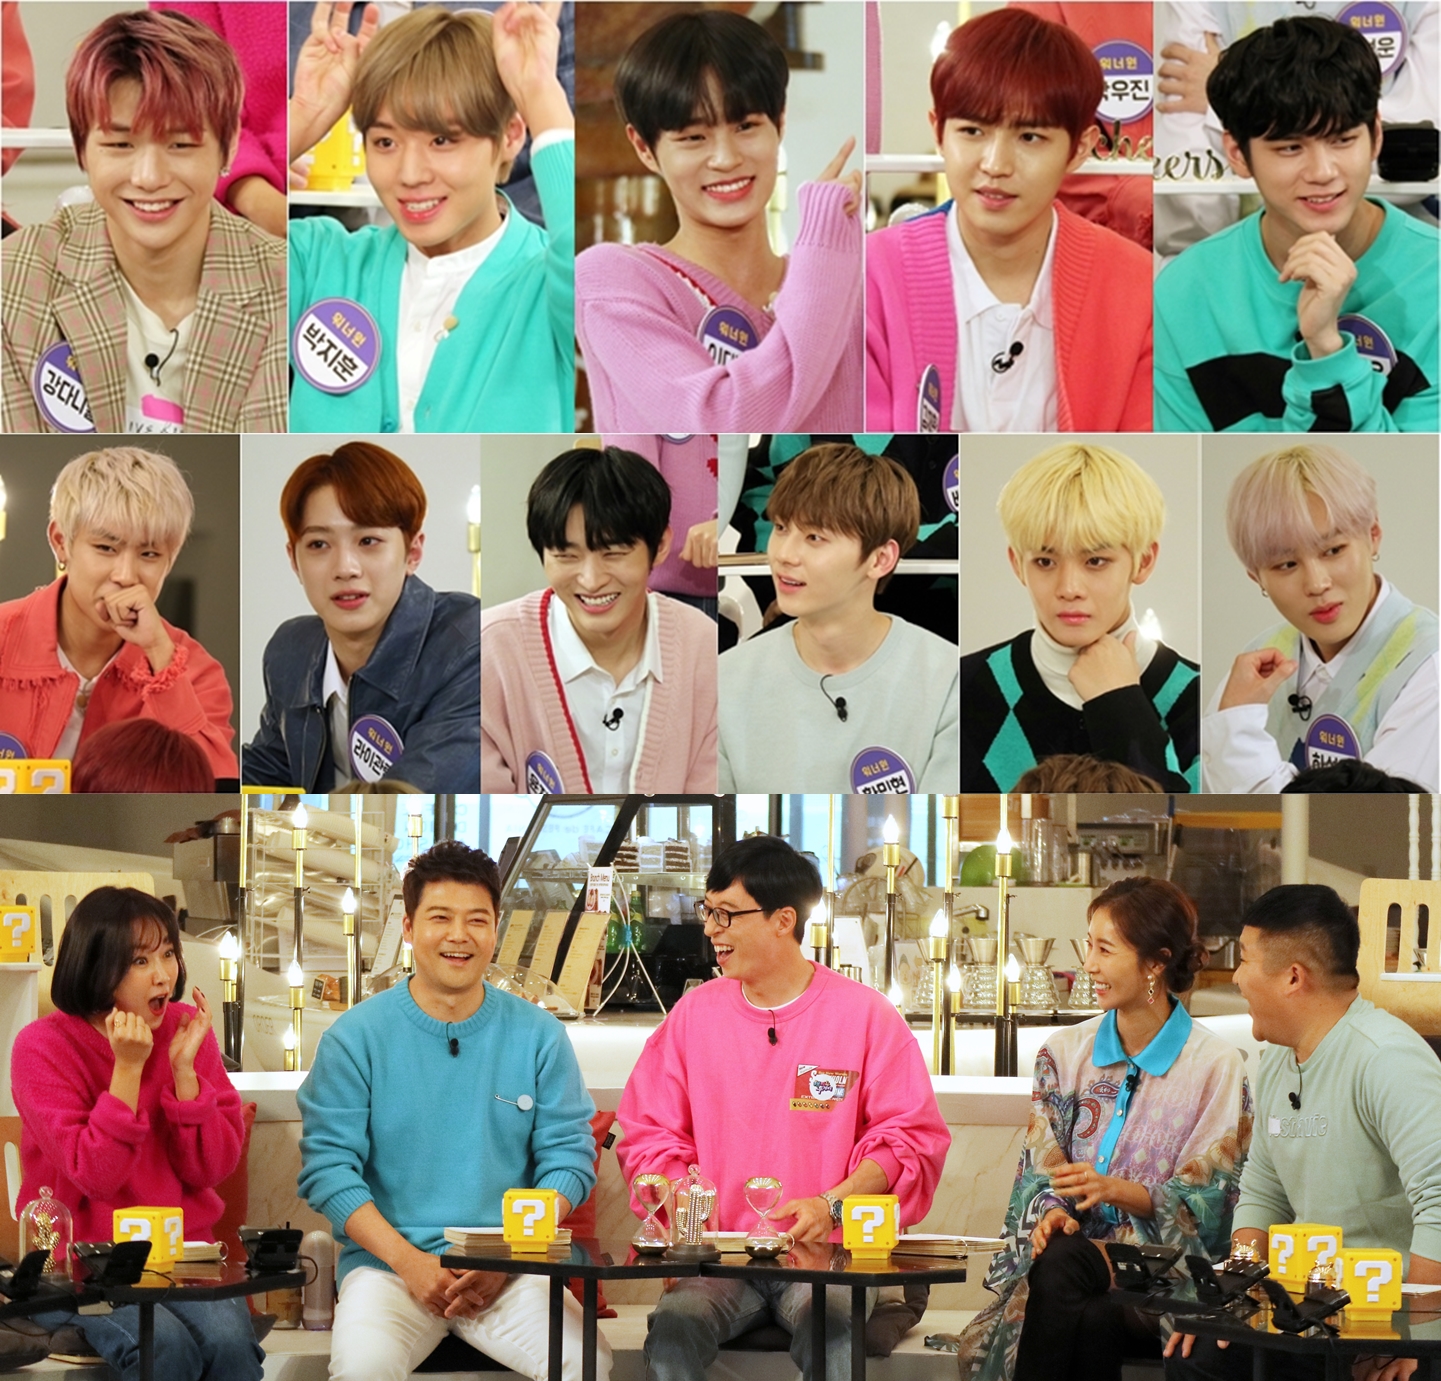 In Happy Together 4, Wanna One Kang Daniel explodes his unfavorable desire for entertainment and shows off his talk skills.The 15th broadcast of KBS2 Happy Together 4 (hereinafter referred to as Hatu 4), which is the number one audience rating of 2049 and continues to be hot topic, will be featured as Wanna One Special, which is a full-length Wanna One.On the day of the show, Special MC Han Eun-jung - Kim Ji-hye and other performing arts Idol Wanna One will appear and throw a laughing nuclear bomb at the house theater on Thursday night.In a recent recording, Kang Daniel confessed to the desire for entertainment, which he had hidden, saying, I am greedy for broadcasting these days.He then said that he had a meeting with his friends for Episode, and I kept calling the artist every time Episode came up, he said, showing off the aspect of Episode obsession.In addition, Rygwanrin, who had taken out the Episode without hesitation, said, If Yoo Jae-seok wants to talk about five more Episodes, he said.On the other hand, Yoon Ji-sung said, I was in Busan on the day Hwang Min-hyun played Haitu 4 Special MC.Yoon Ji-sung said, Wanna One is busy, but I am not busy. Call me anytime.Wanna One, who made headlines with her full appearance on the same day, is the back door of the talk box end king who has been shaking off all of his meetings.Also, it is said that the laughter has not ceased due to the artistic sense of those who have confided in their souls, such as a godly dance showdown that predicts uninterrupted talk and rare work, raising expectations vertically in Happy Together 4 - Wanna One special.KBS2 Happy Together 4 will be broadcast at 11:10 pm on the 15th.